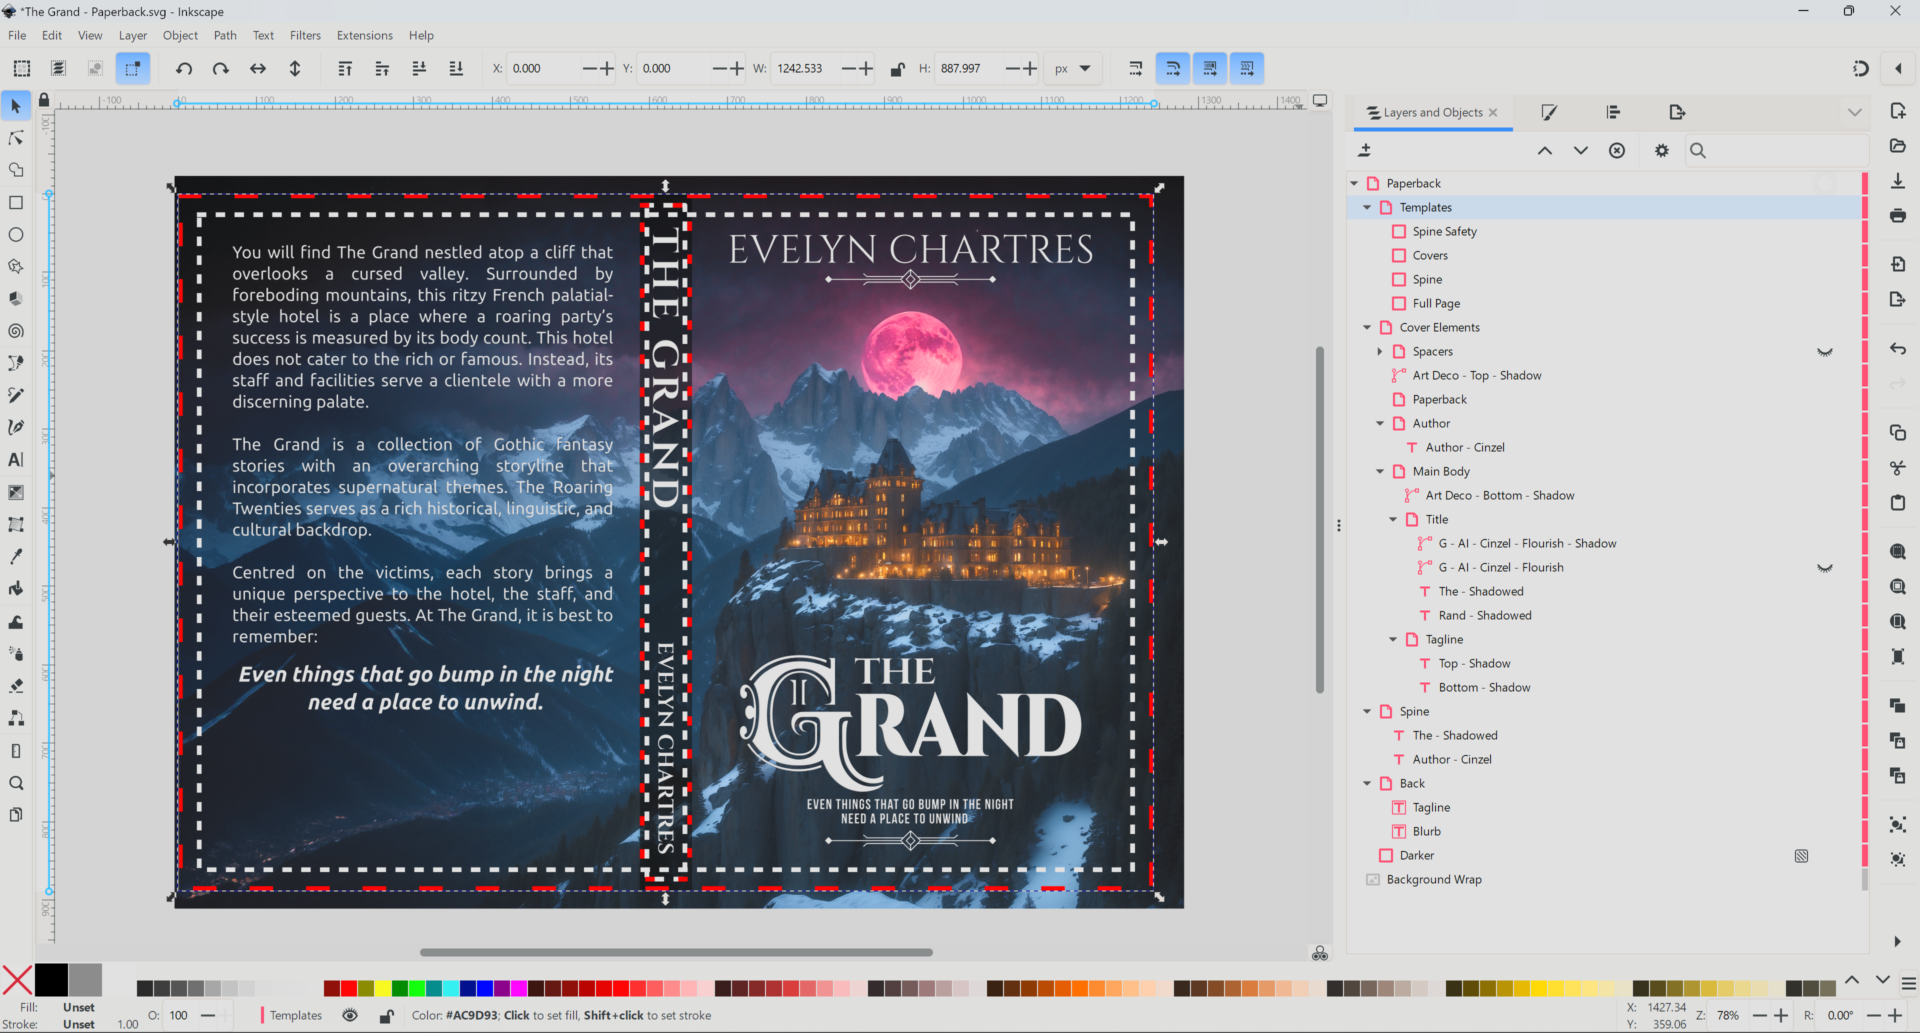 Screen capture of an Inkscape workspace featuring The Grand's paperback cover by Evelyn Chartres.